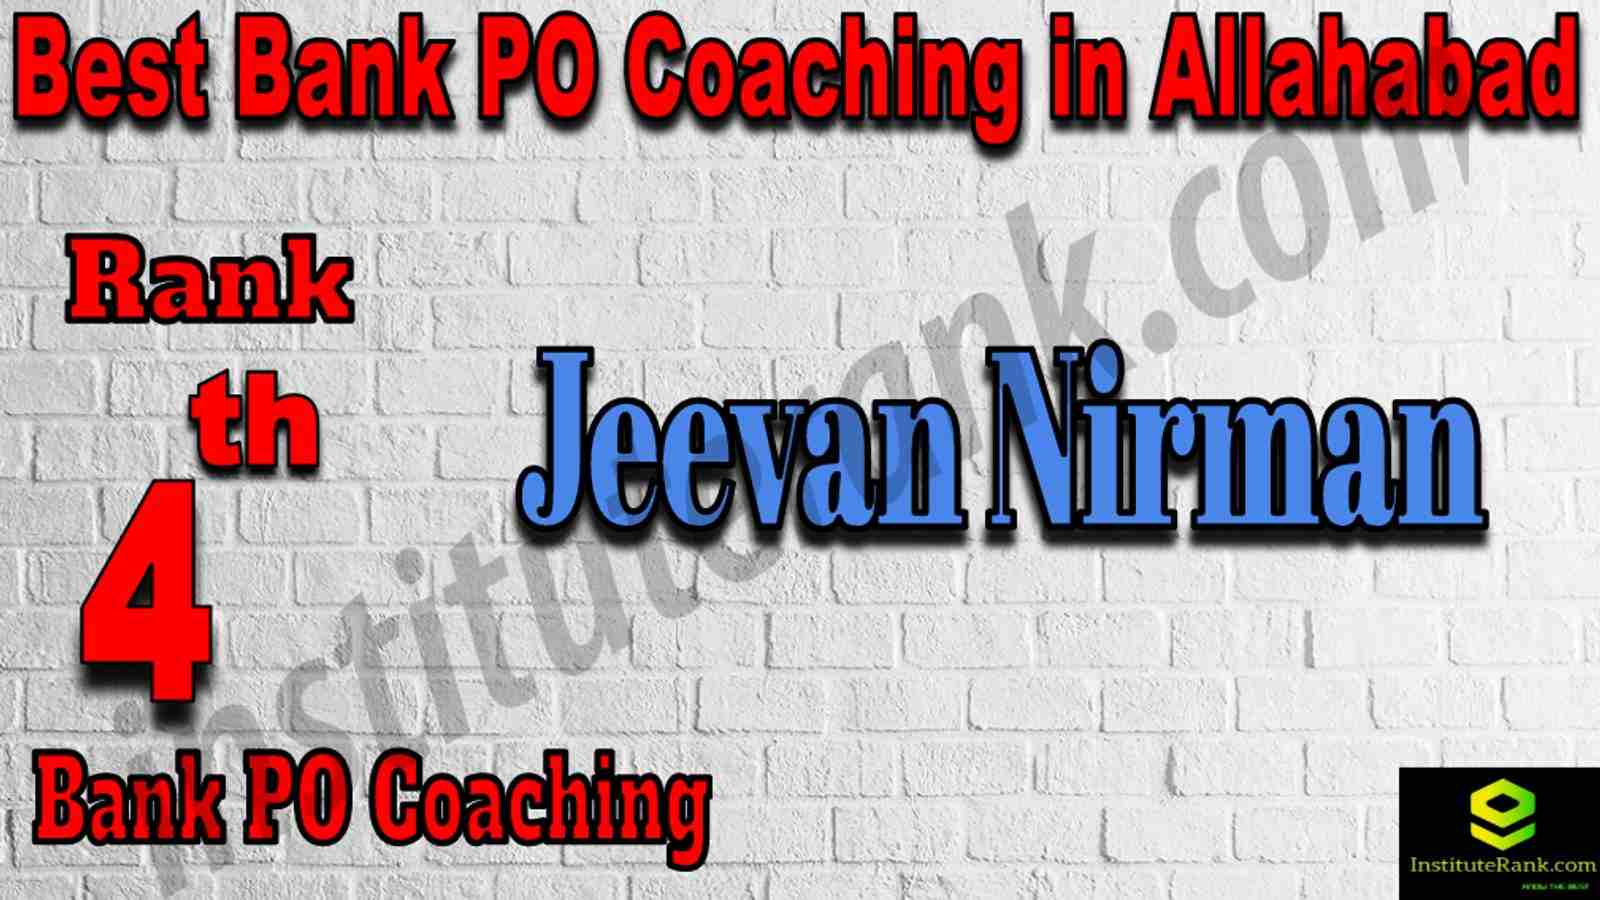 4th Best Bank PO Coaching in Allahabad